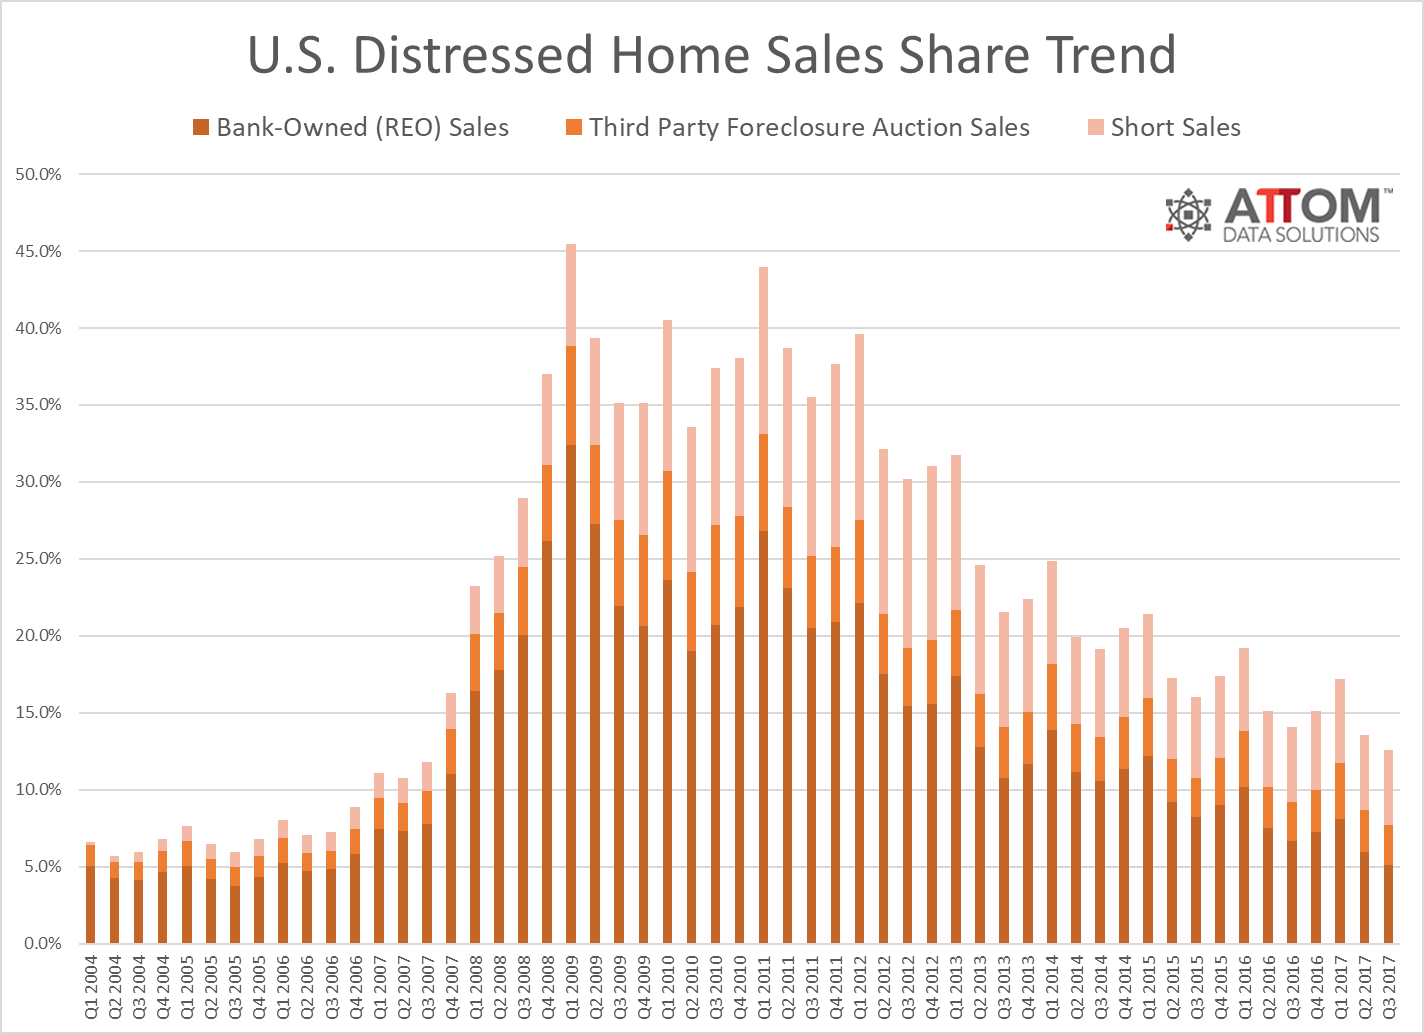 Distressed home sales accounted for 12.5 percent of all residential sales activity in the third quarter, according to new figures released by ATTOM Data Solutions